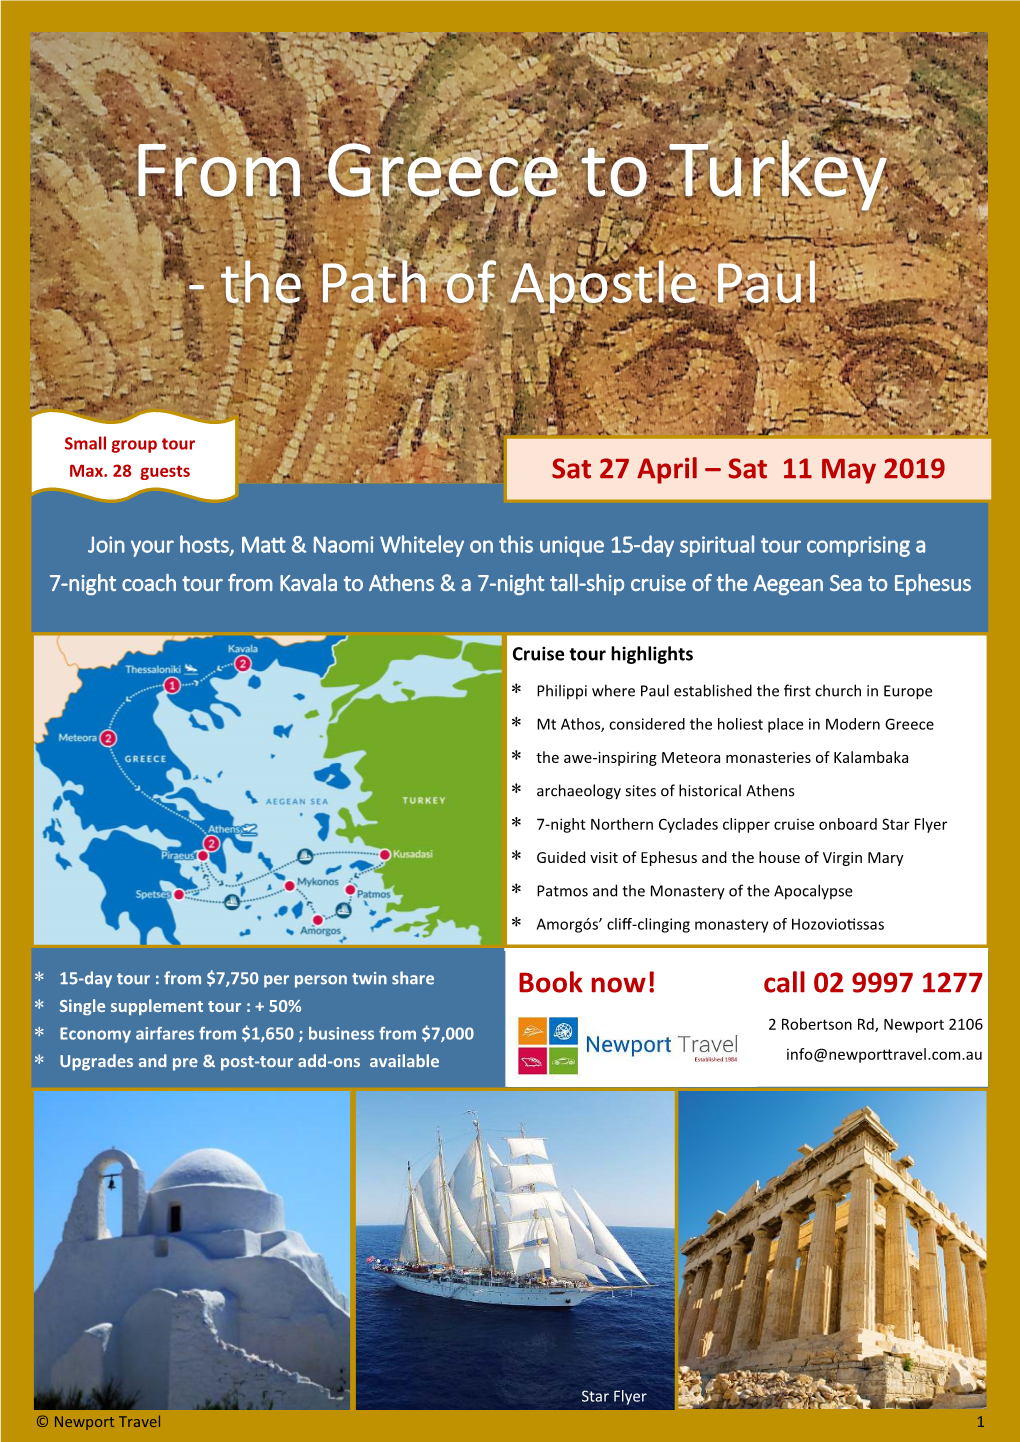 From Greece to Turkey - the Path of Apostle Paul